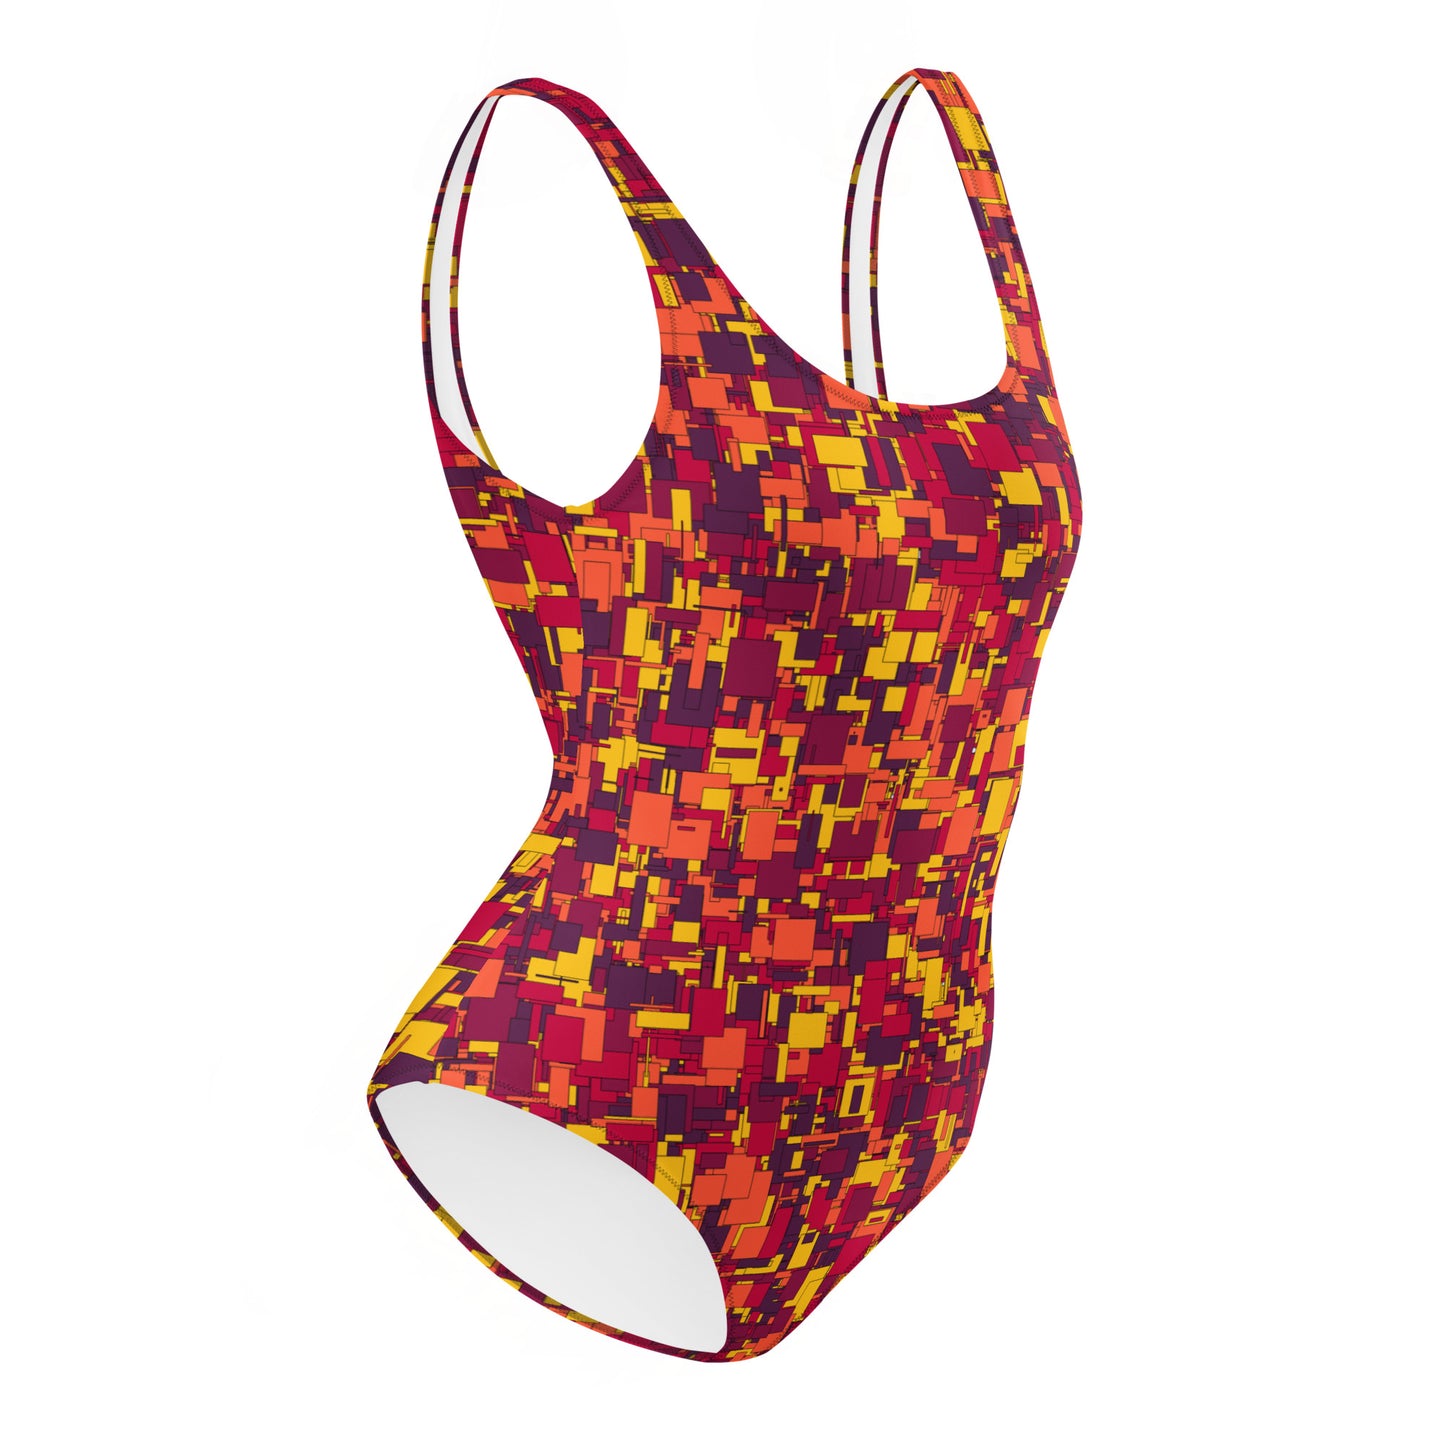 Our Soft and Warm One-Piece Swimsuit with Geometric Patterns is Perfect for a Cozy Day at the Beach